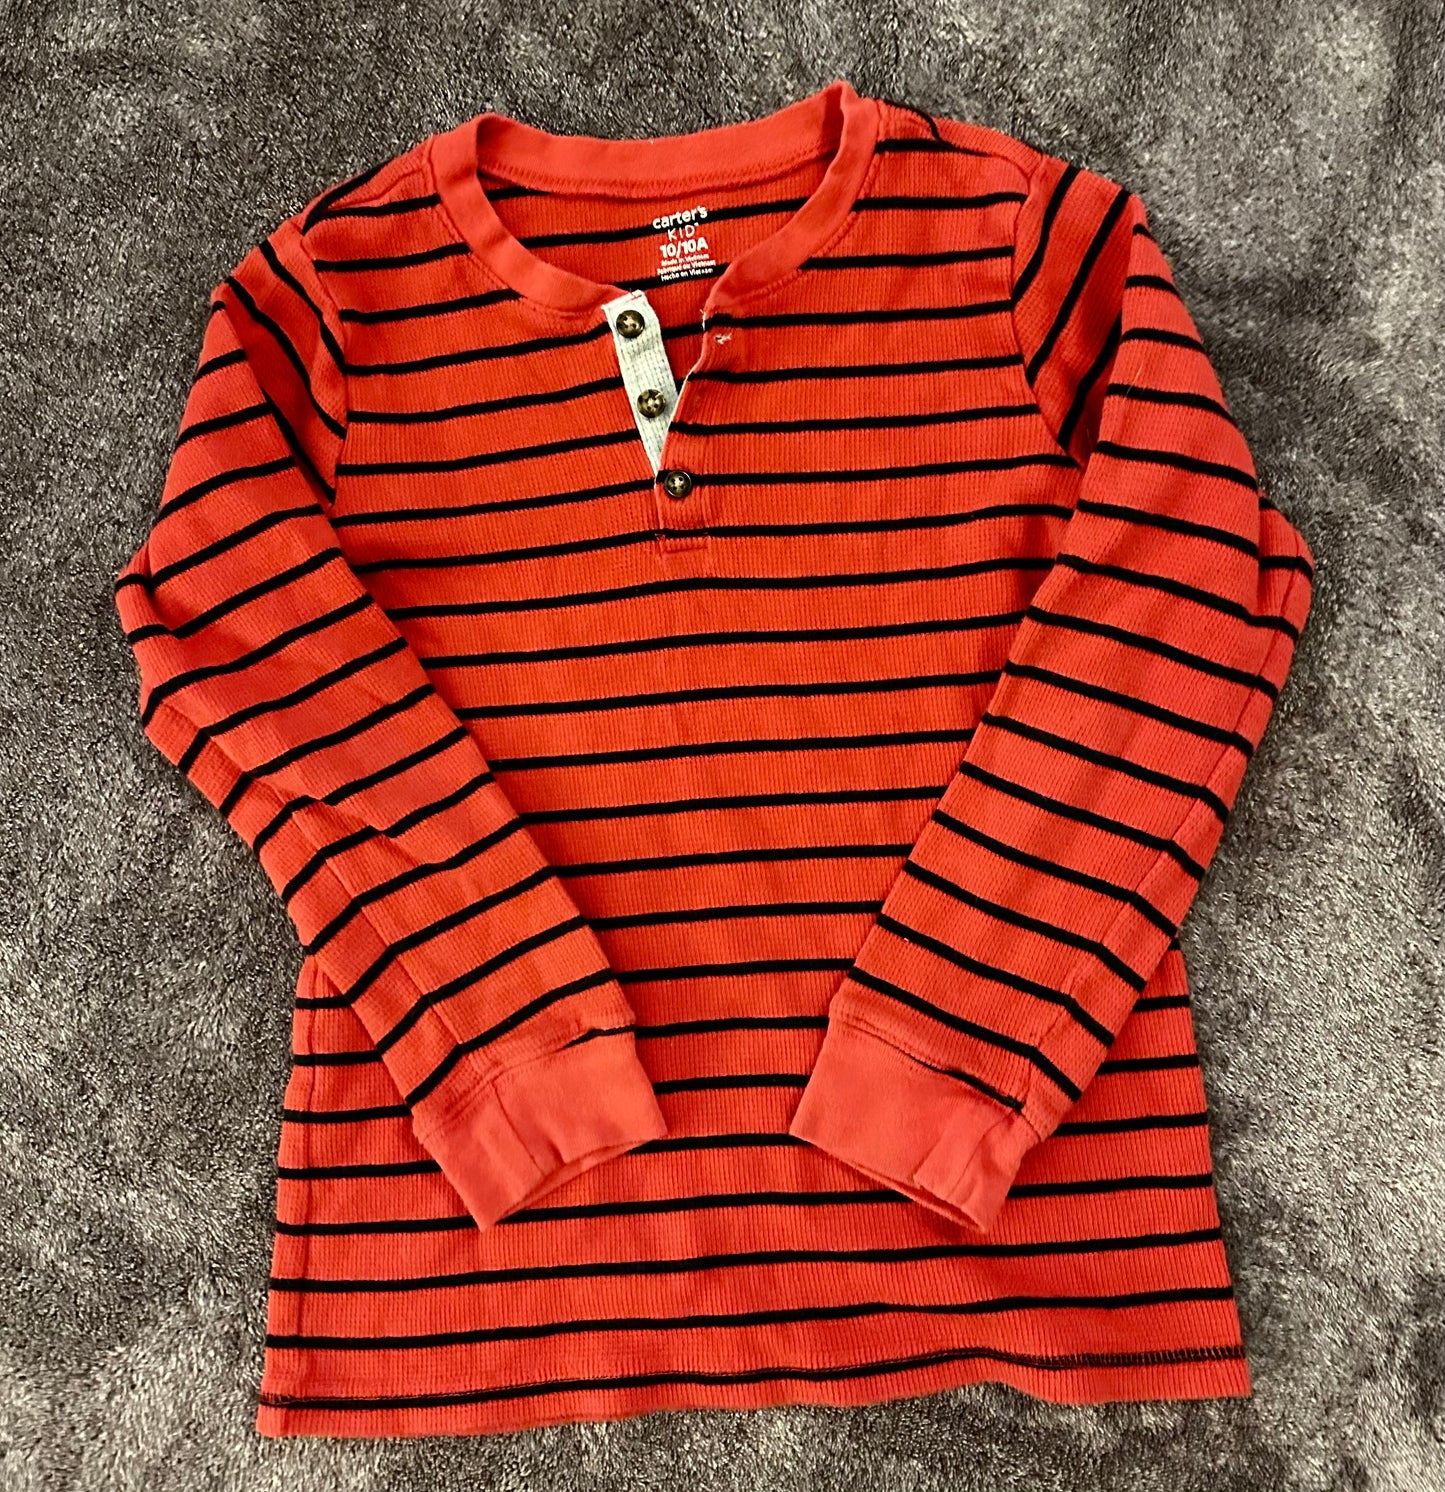 Carters red striped long sleeve shirt size boys 10